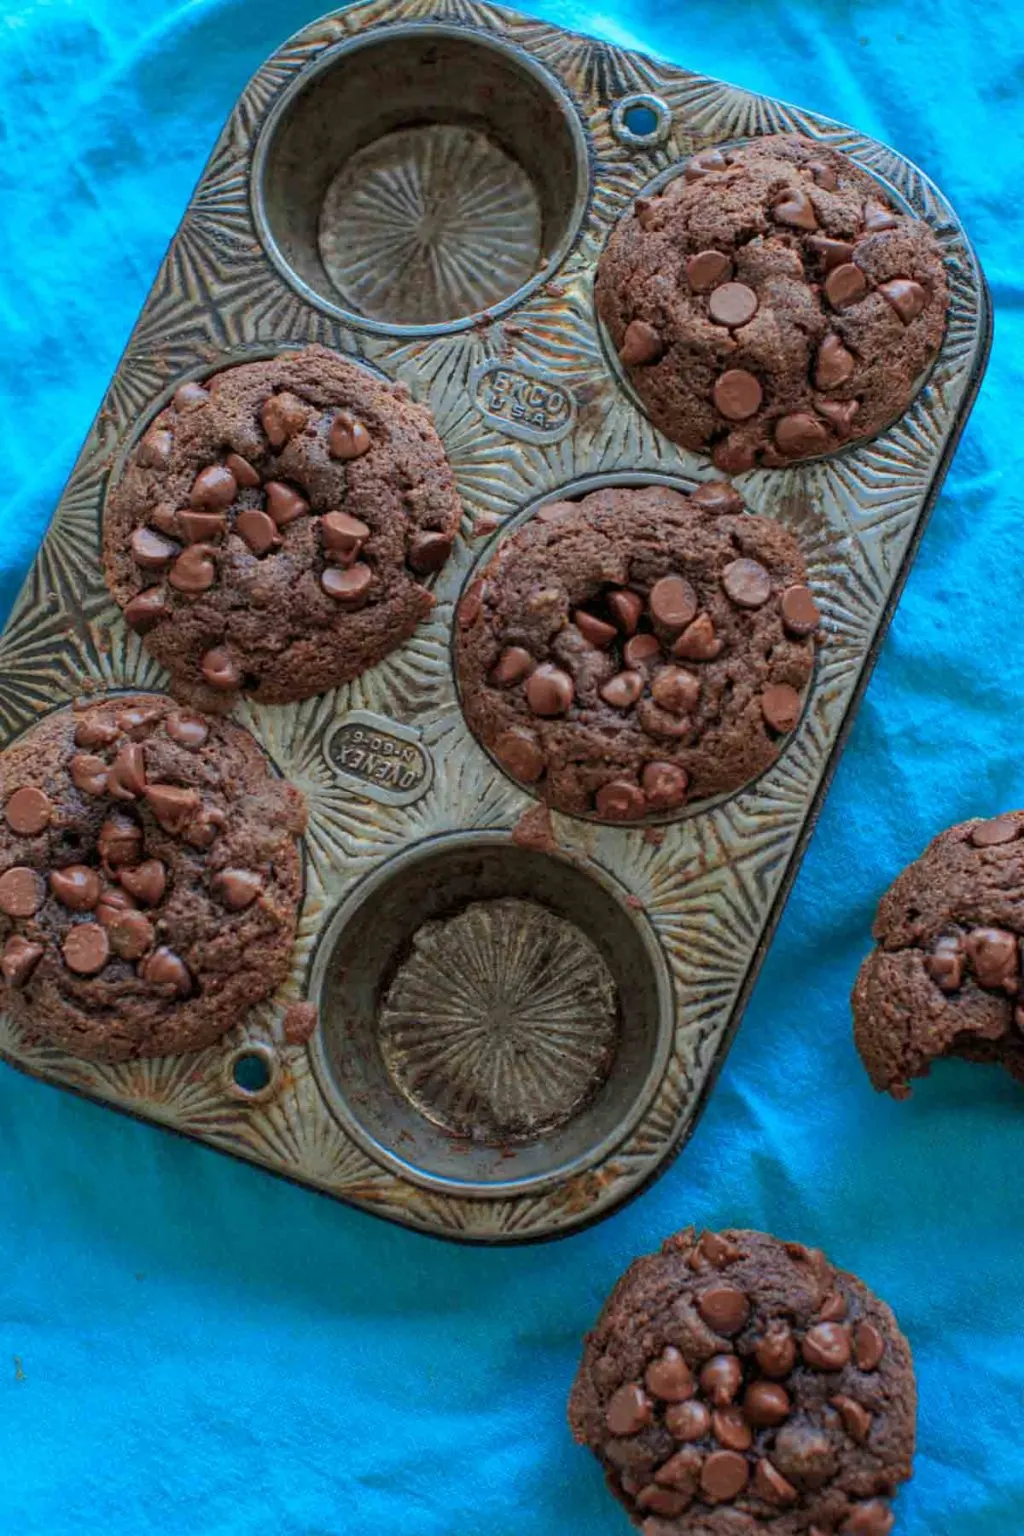 Double Chocolate Coconut Flour Muffins - naturally sweetened with no added sugar, and a paleo friendly snack.